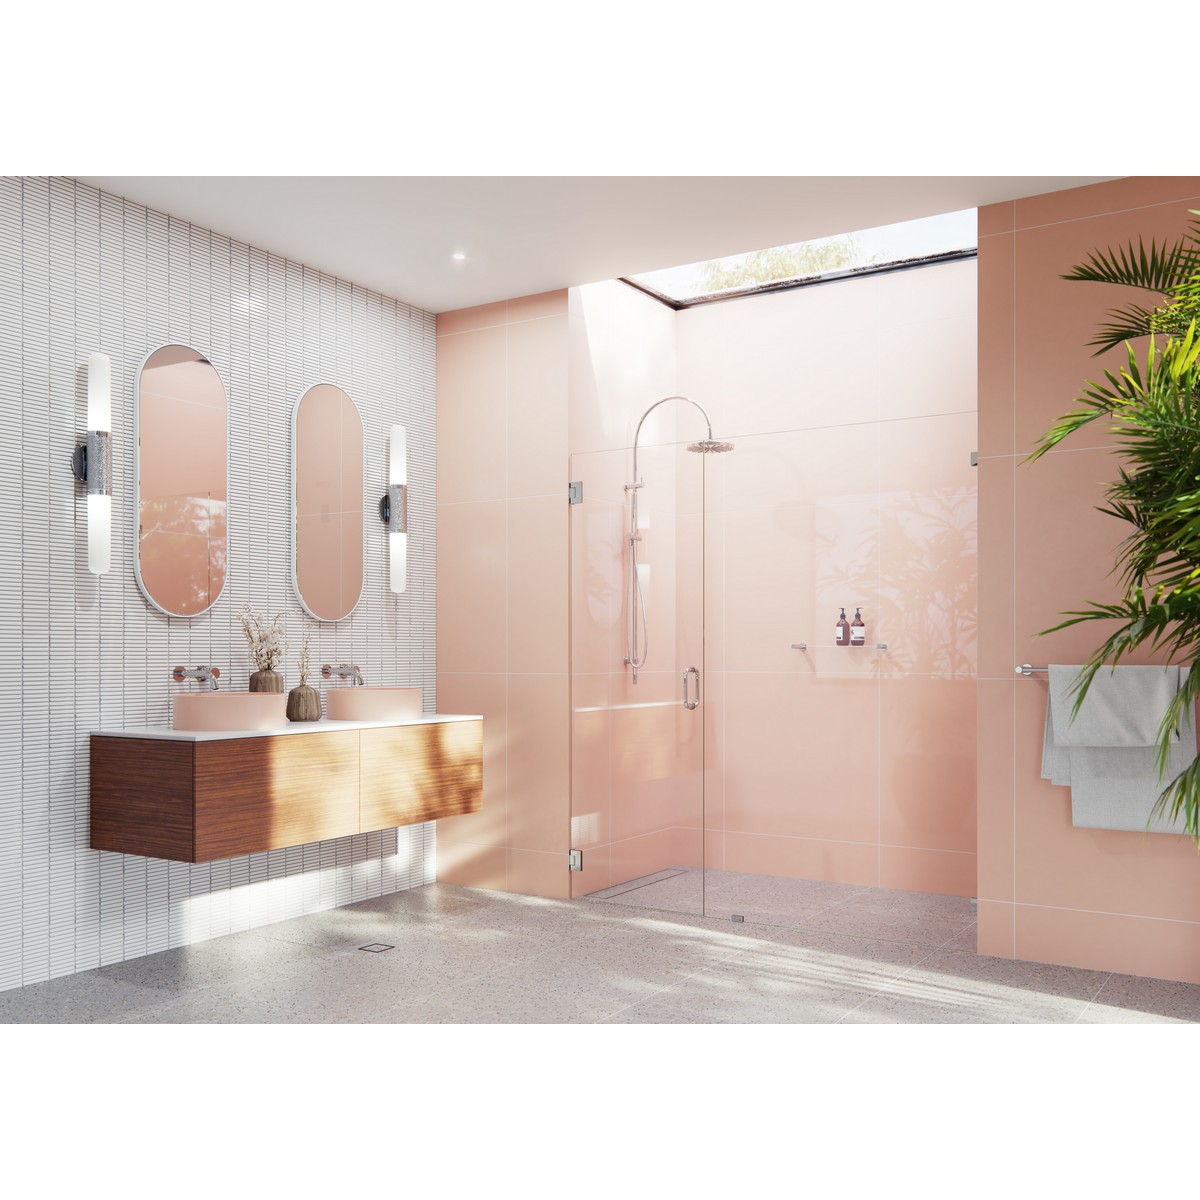 GLASS WAREHOUSE GW-WH-72.75 ILLUME 72 3/4 W X 78 H WALL HINGED FULLY FRAMELESS GLASS SHOWER ENCLOSURE